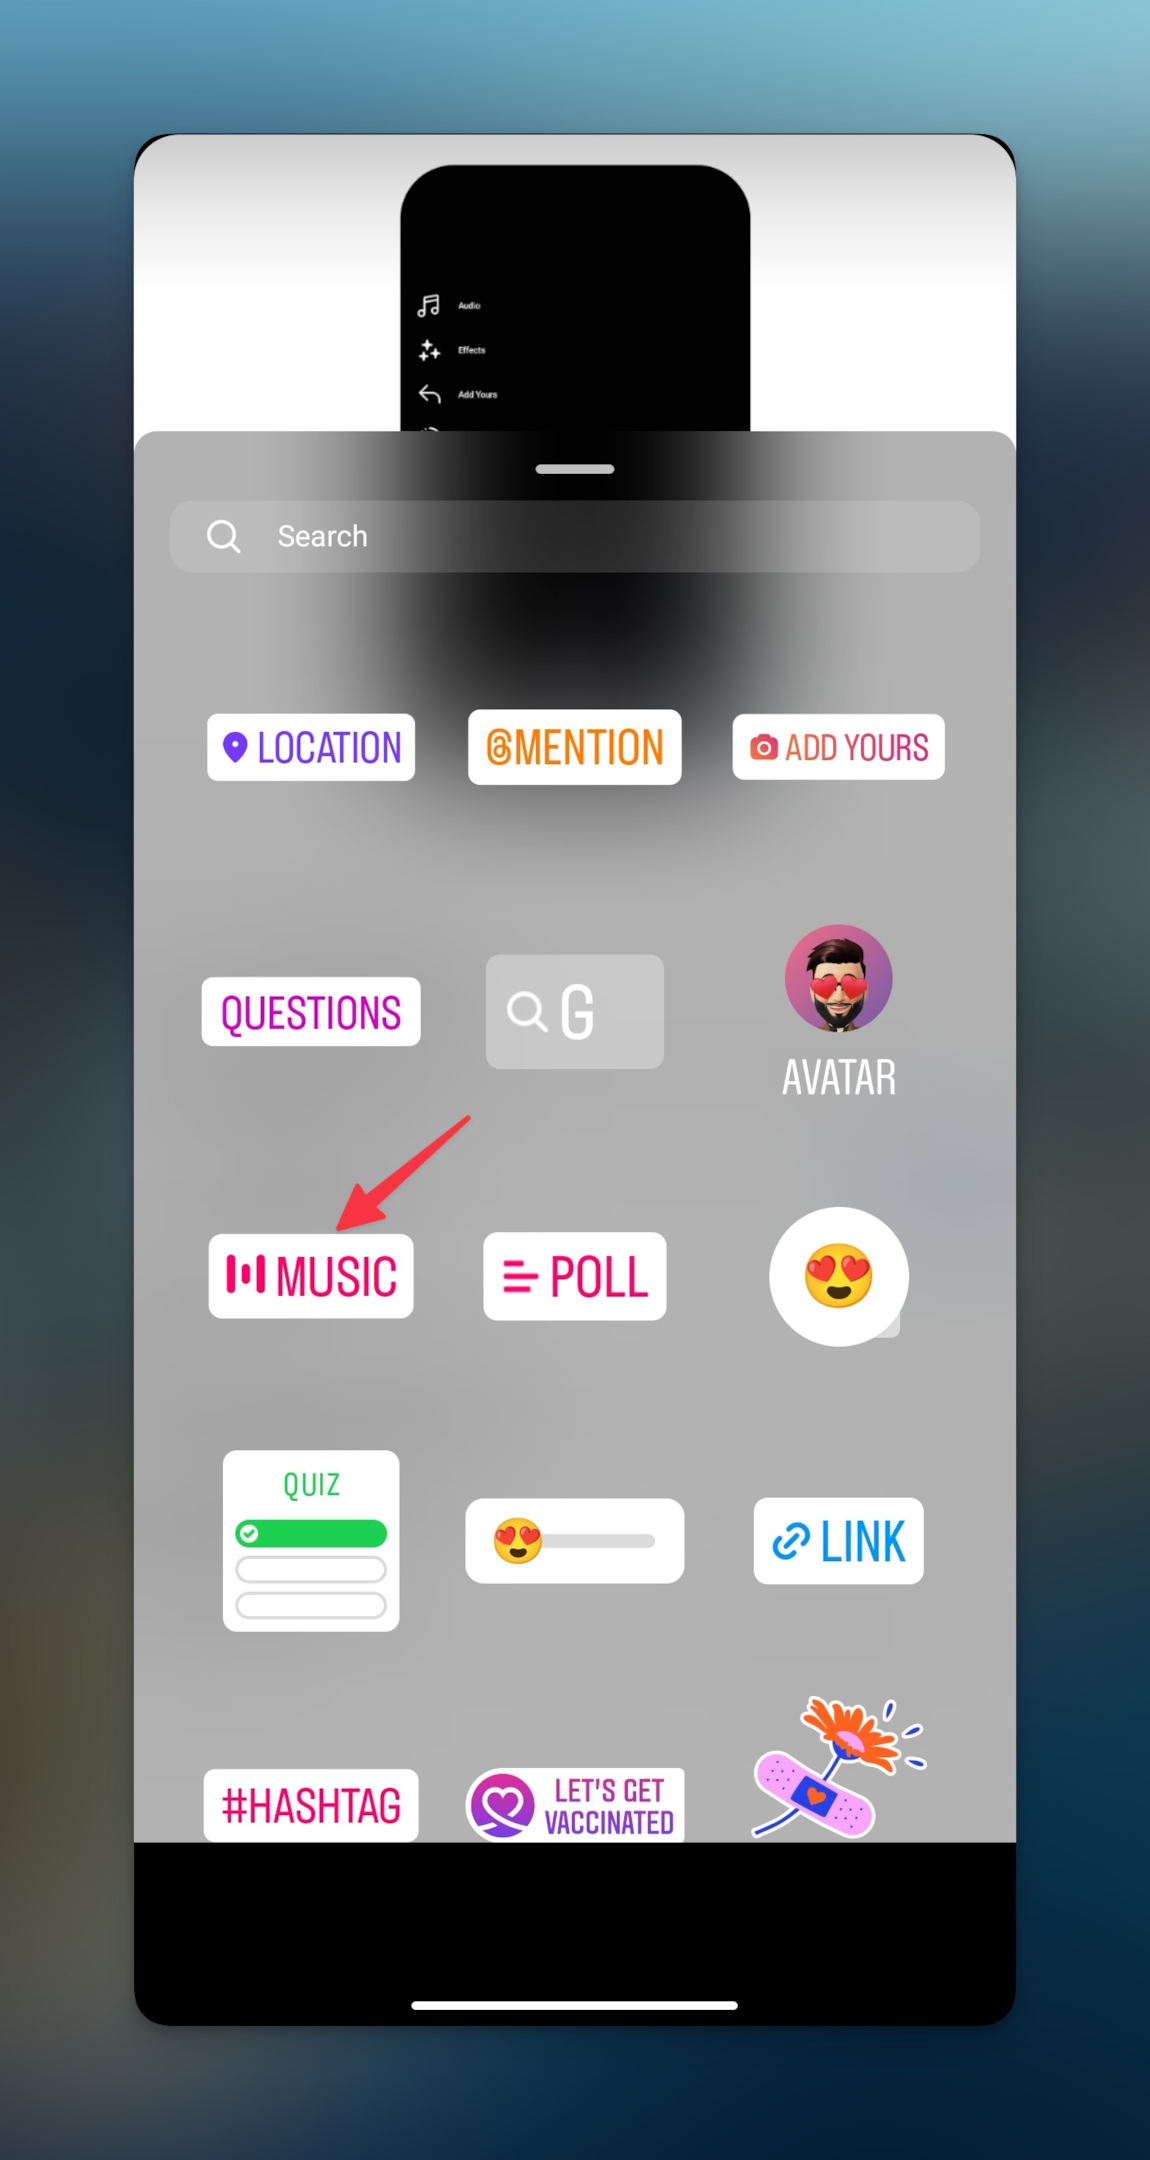 Remote.tools shows how to add music sticker to make reels on Instagram with photos